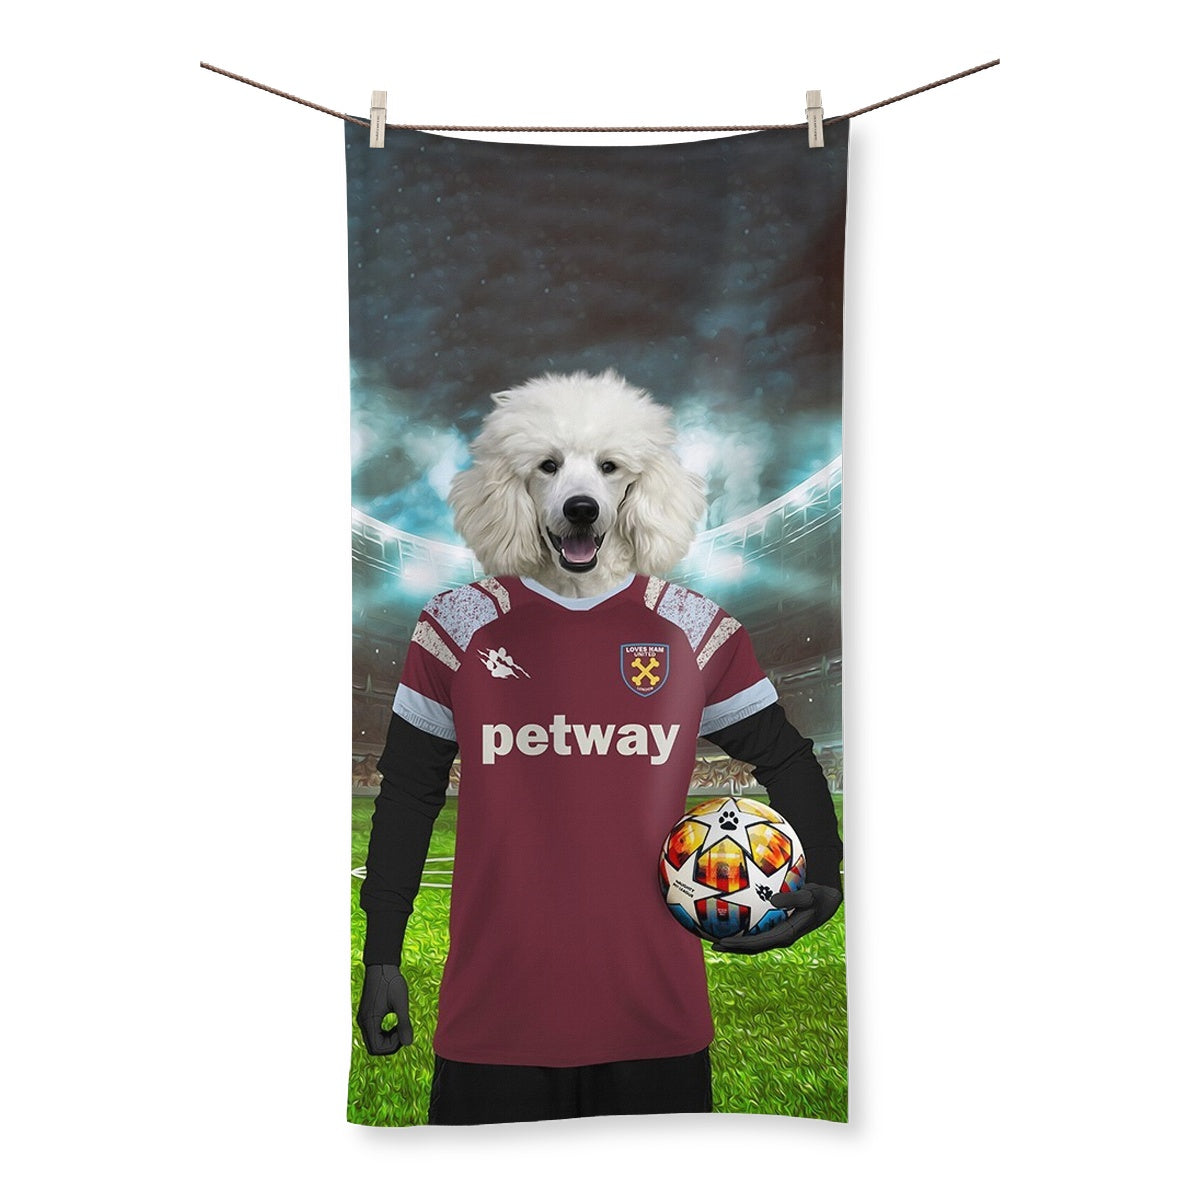 West Ham Football Club: Custom Pet Towel - Paw & Glory, pawandglory, Pet Portrait cushion, dog personalized pillow, pillows with dogs picture, custom printed pillows, my pet pillow, customized throw pillows, photo dog pillows